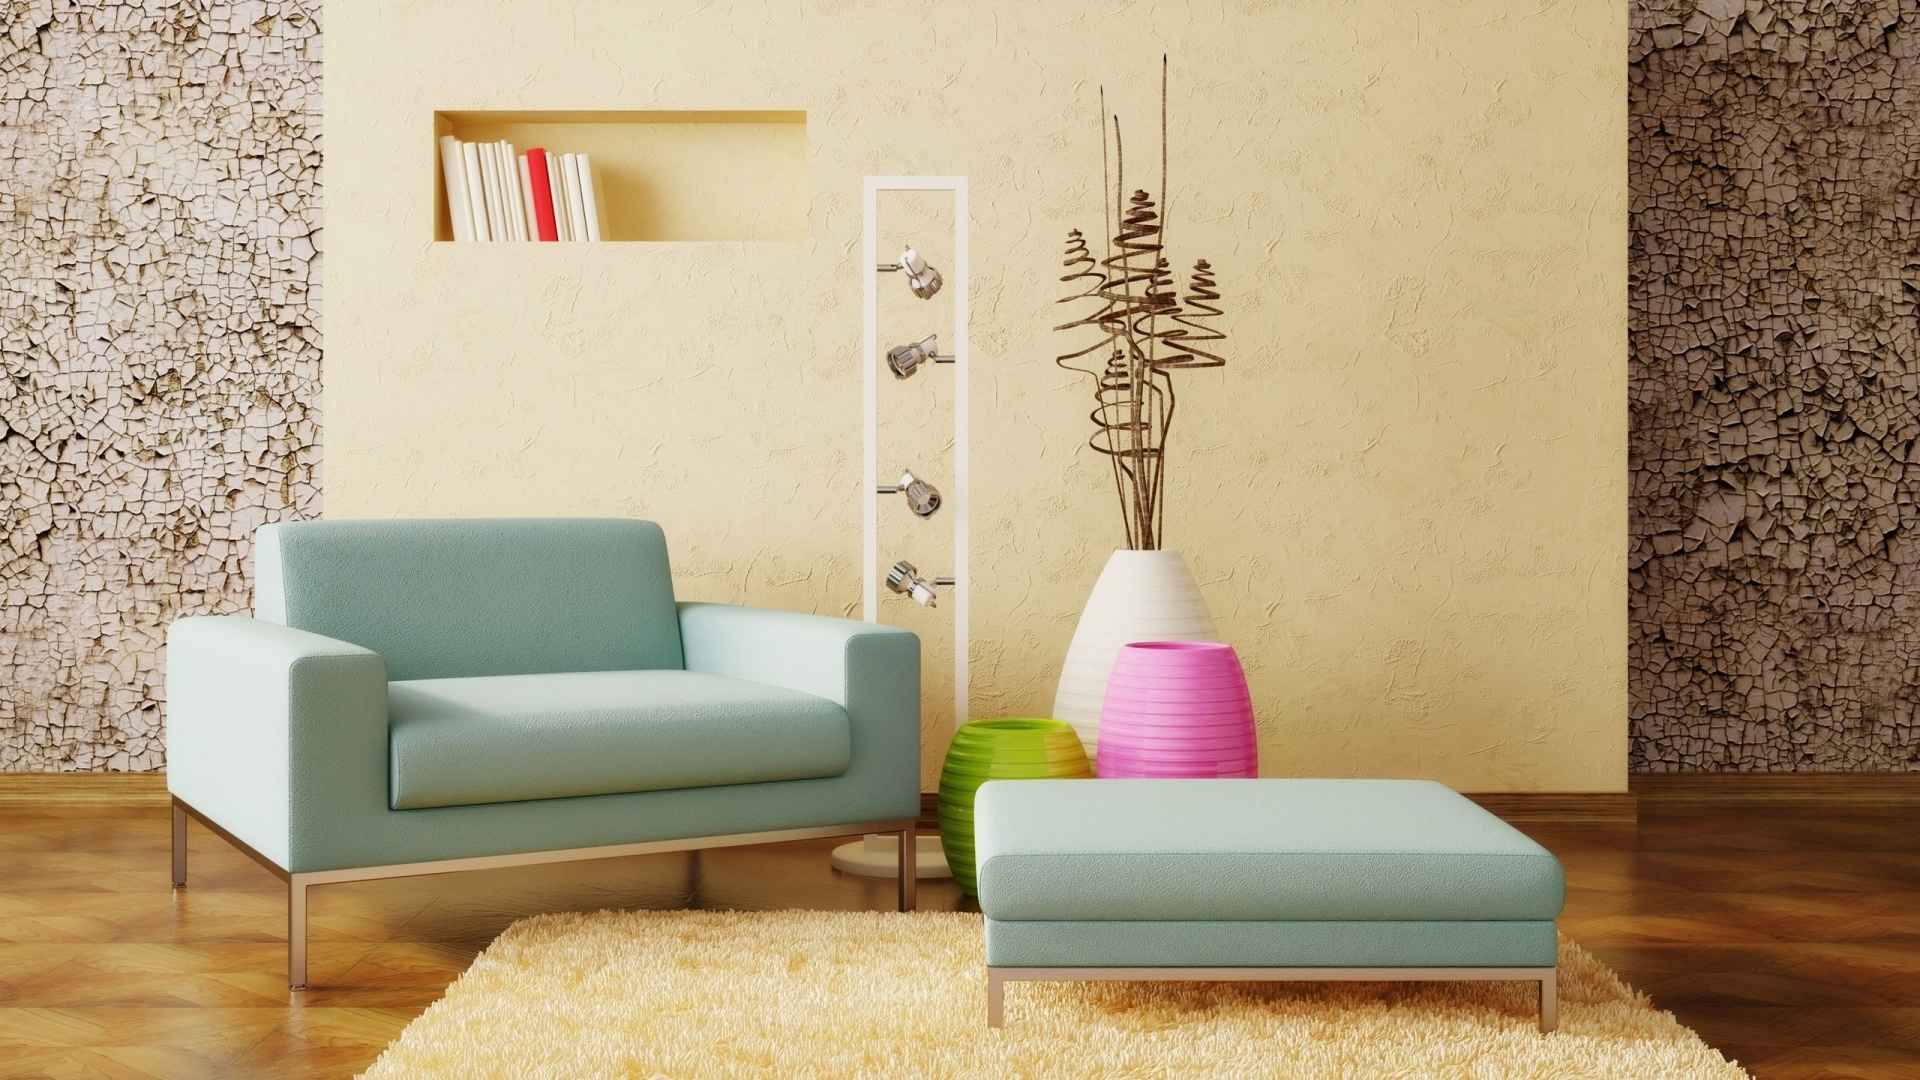 Home Decor With Pastel Shade